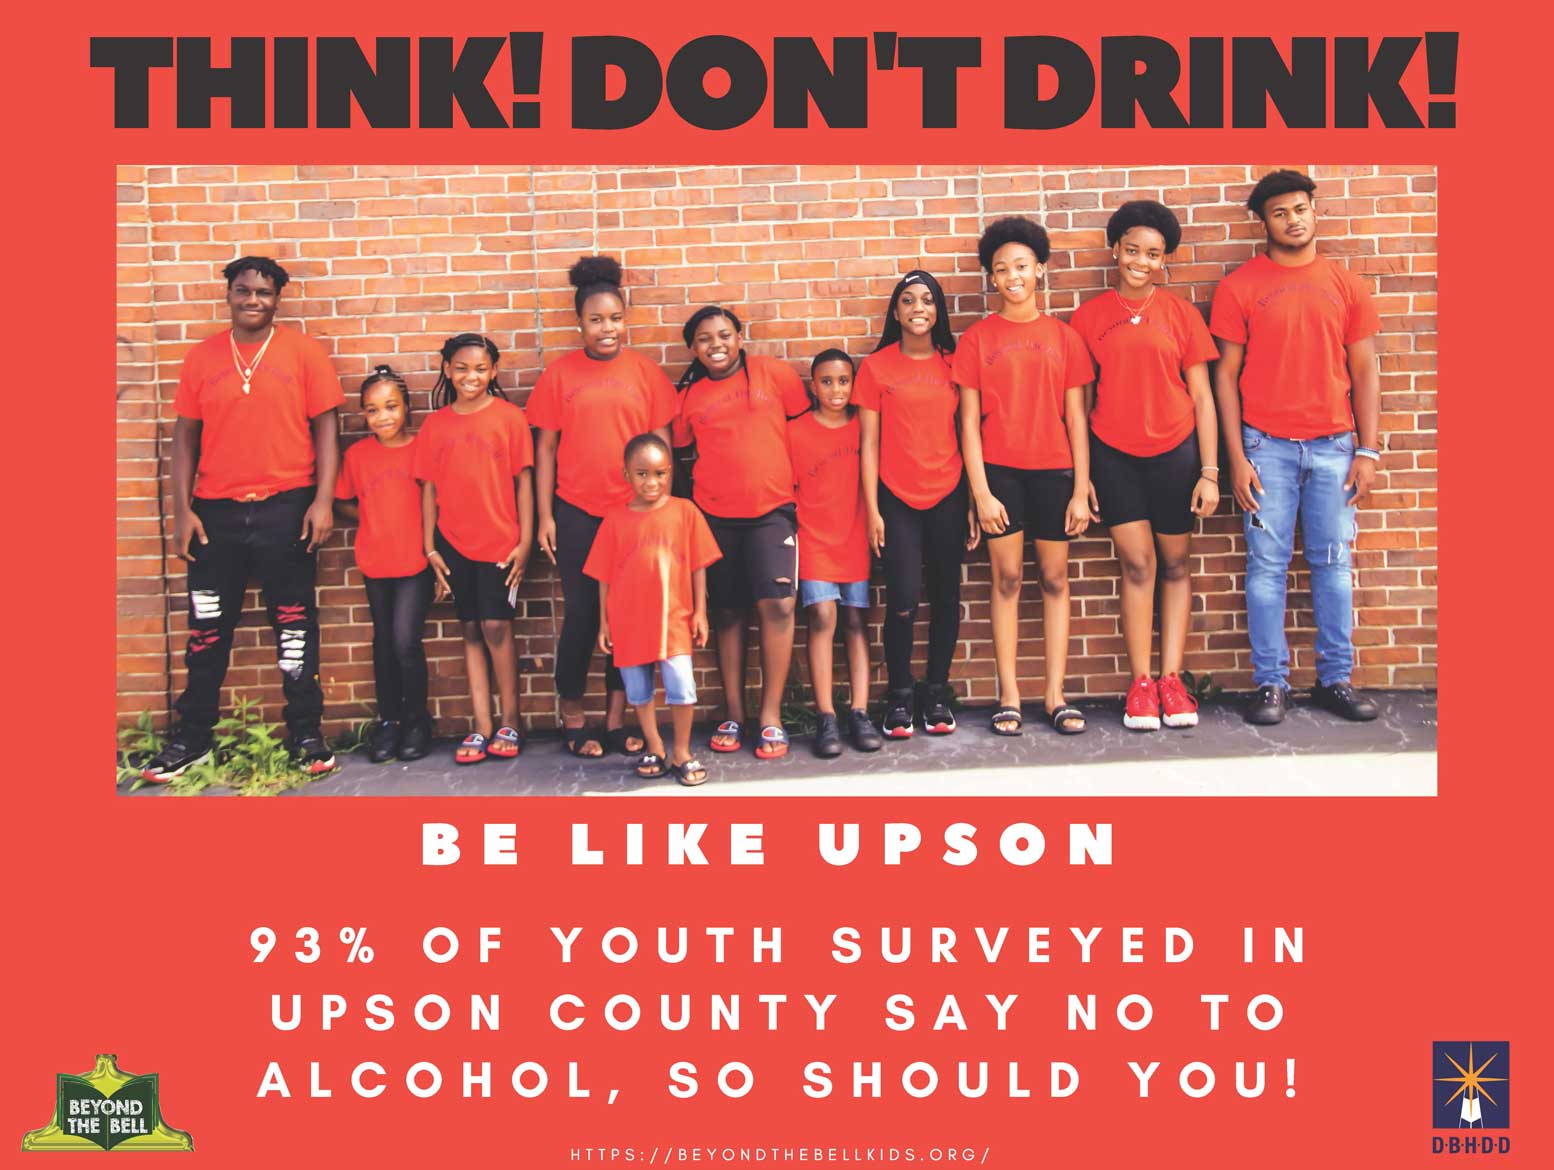 Think! Don't Drink! Be like Upson. 93% of youth surveyed in Upson County say no to alcohol, so should you!